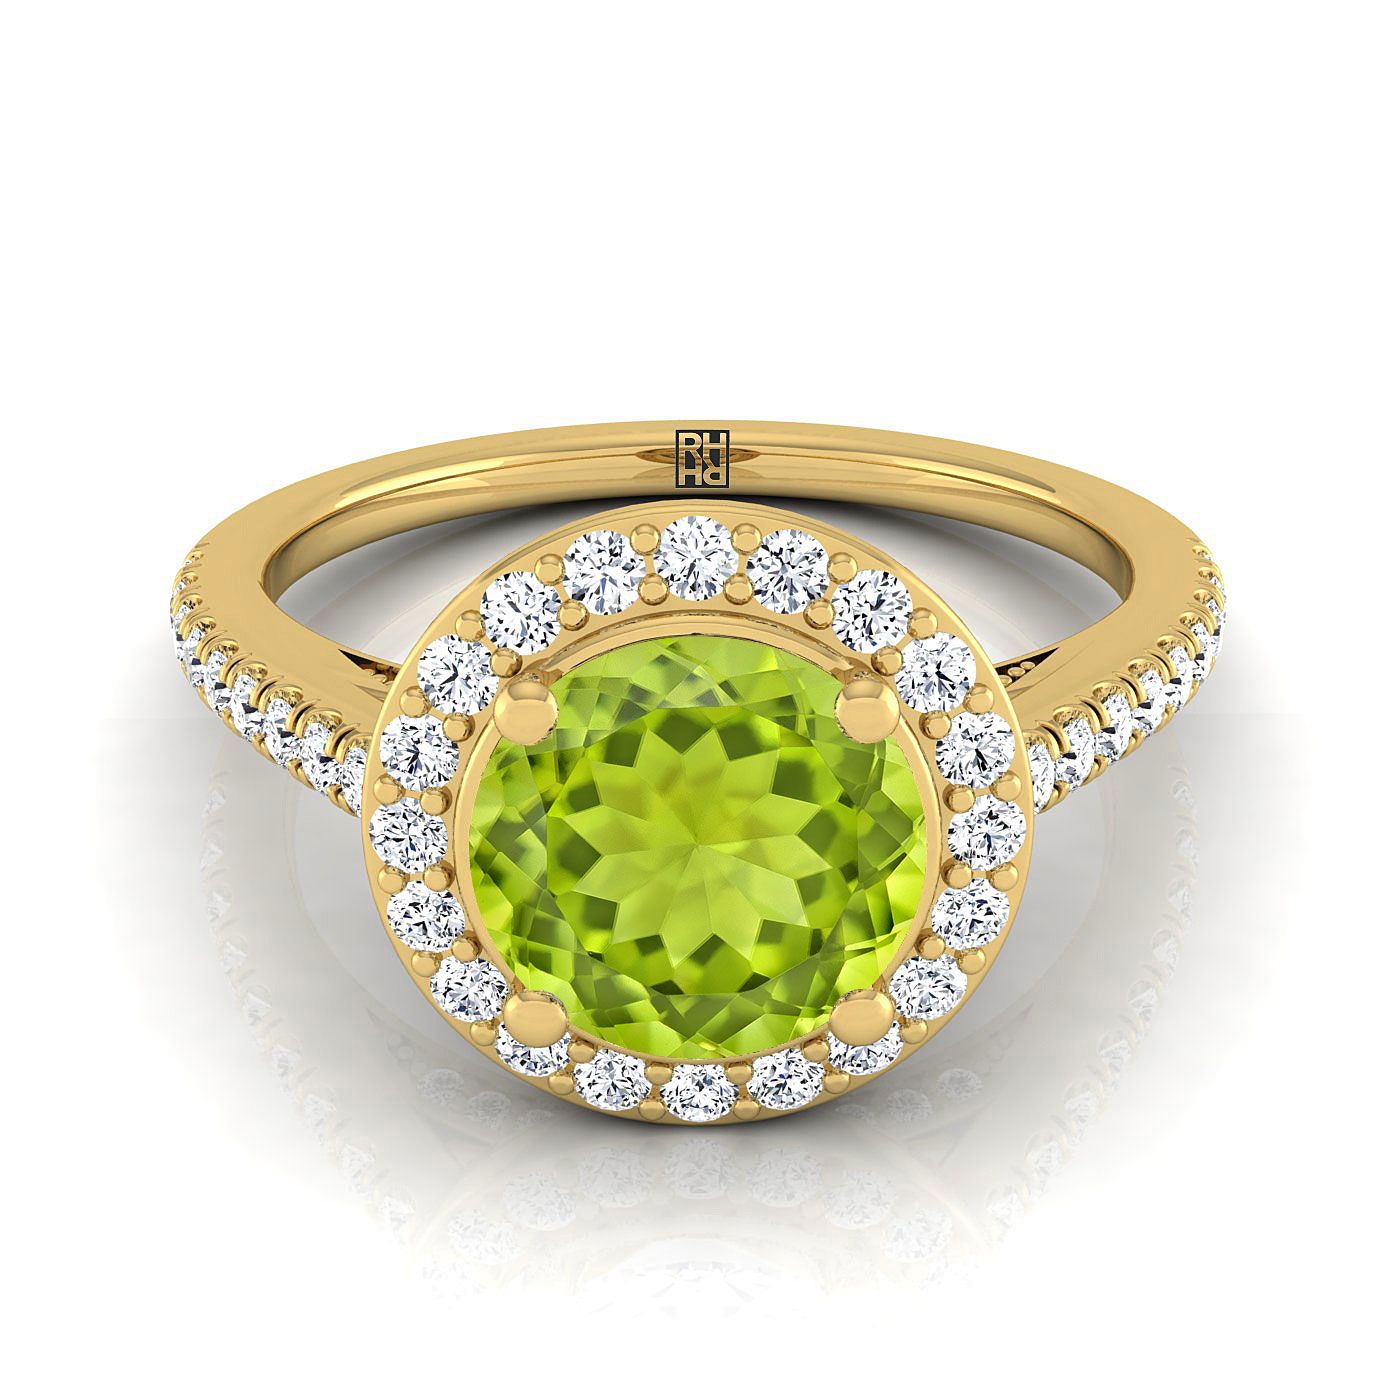 14K Yellow Gold Round Brilliant Peridot French Pave Halo Secret Gallery Diamond Engagement Ring -3/8ctw